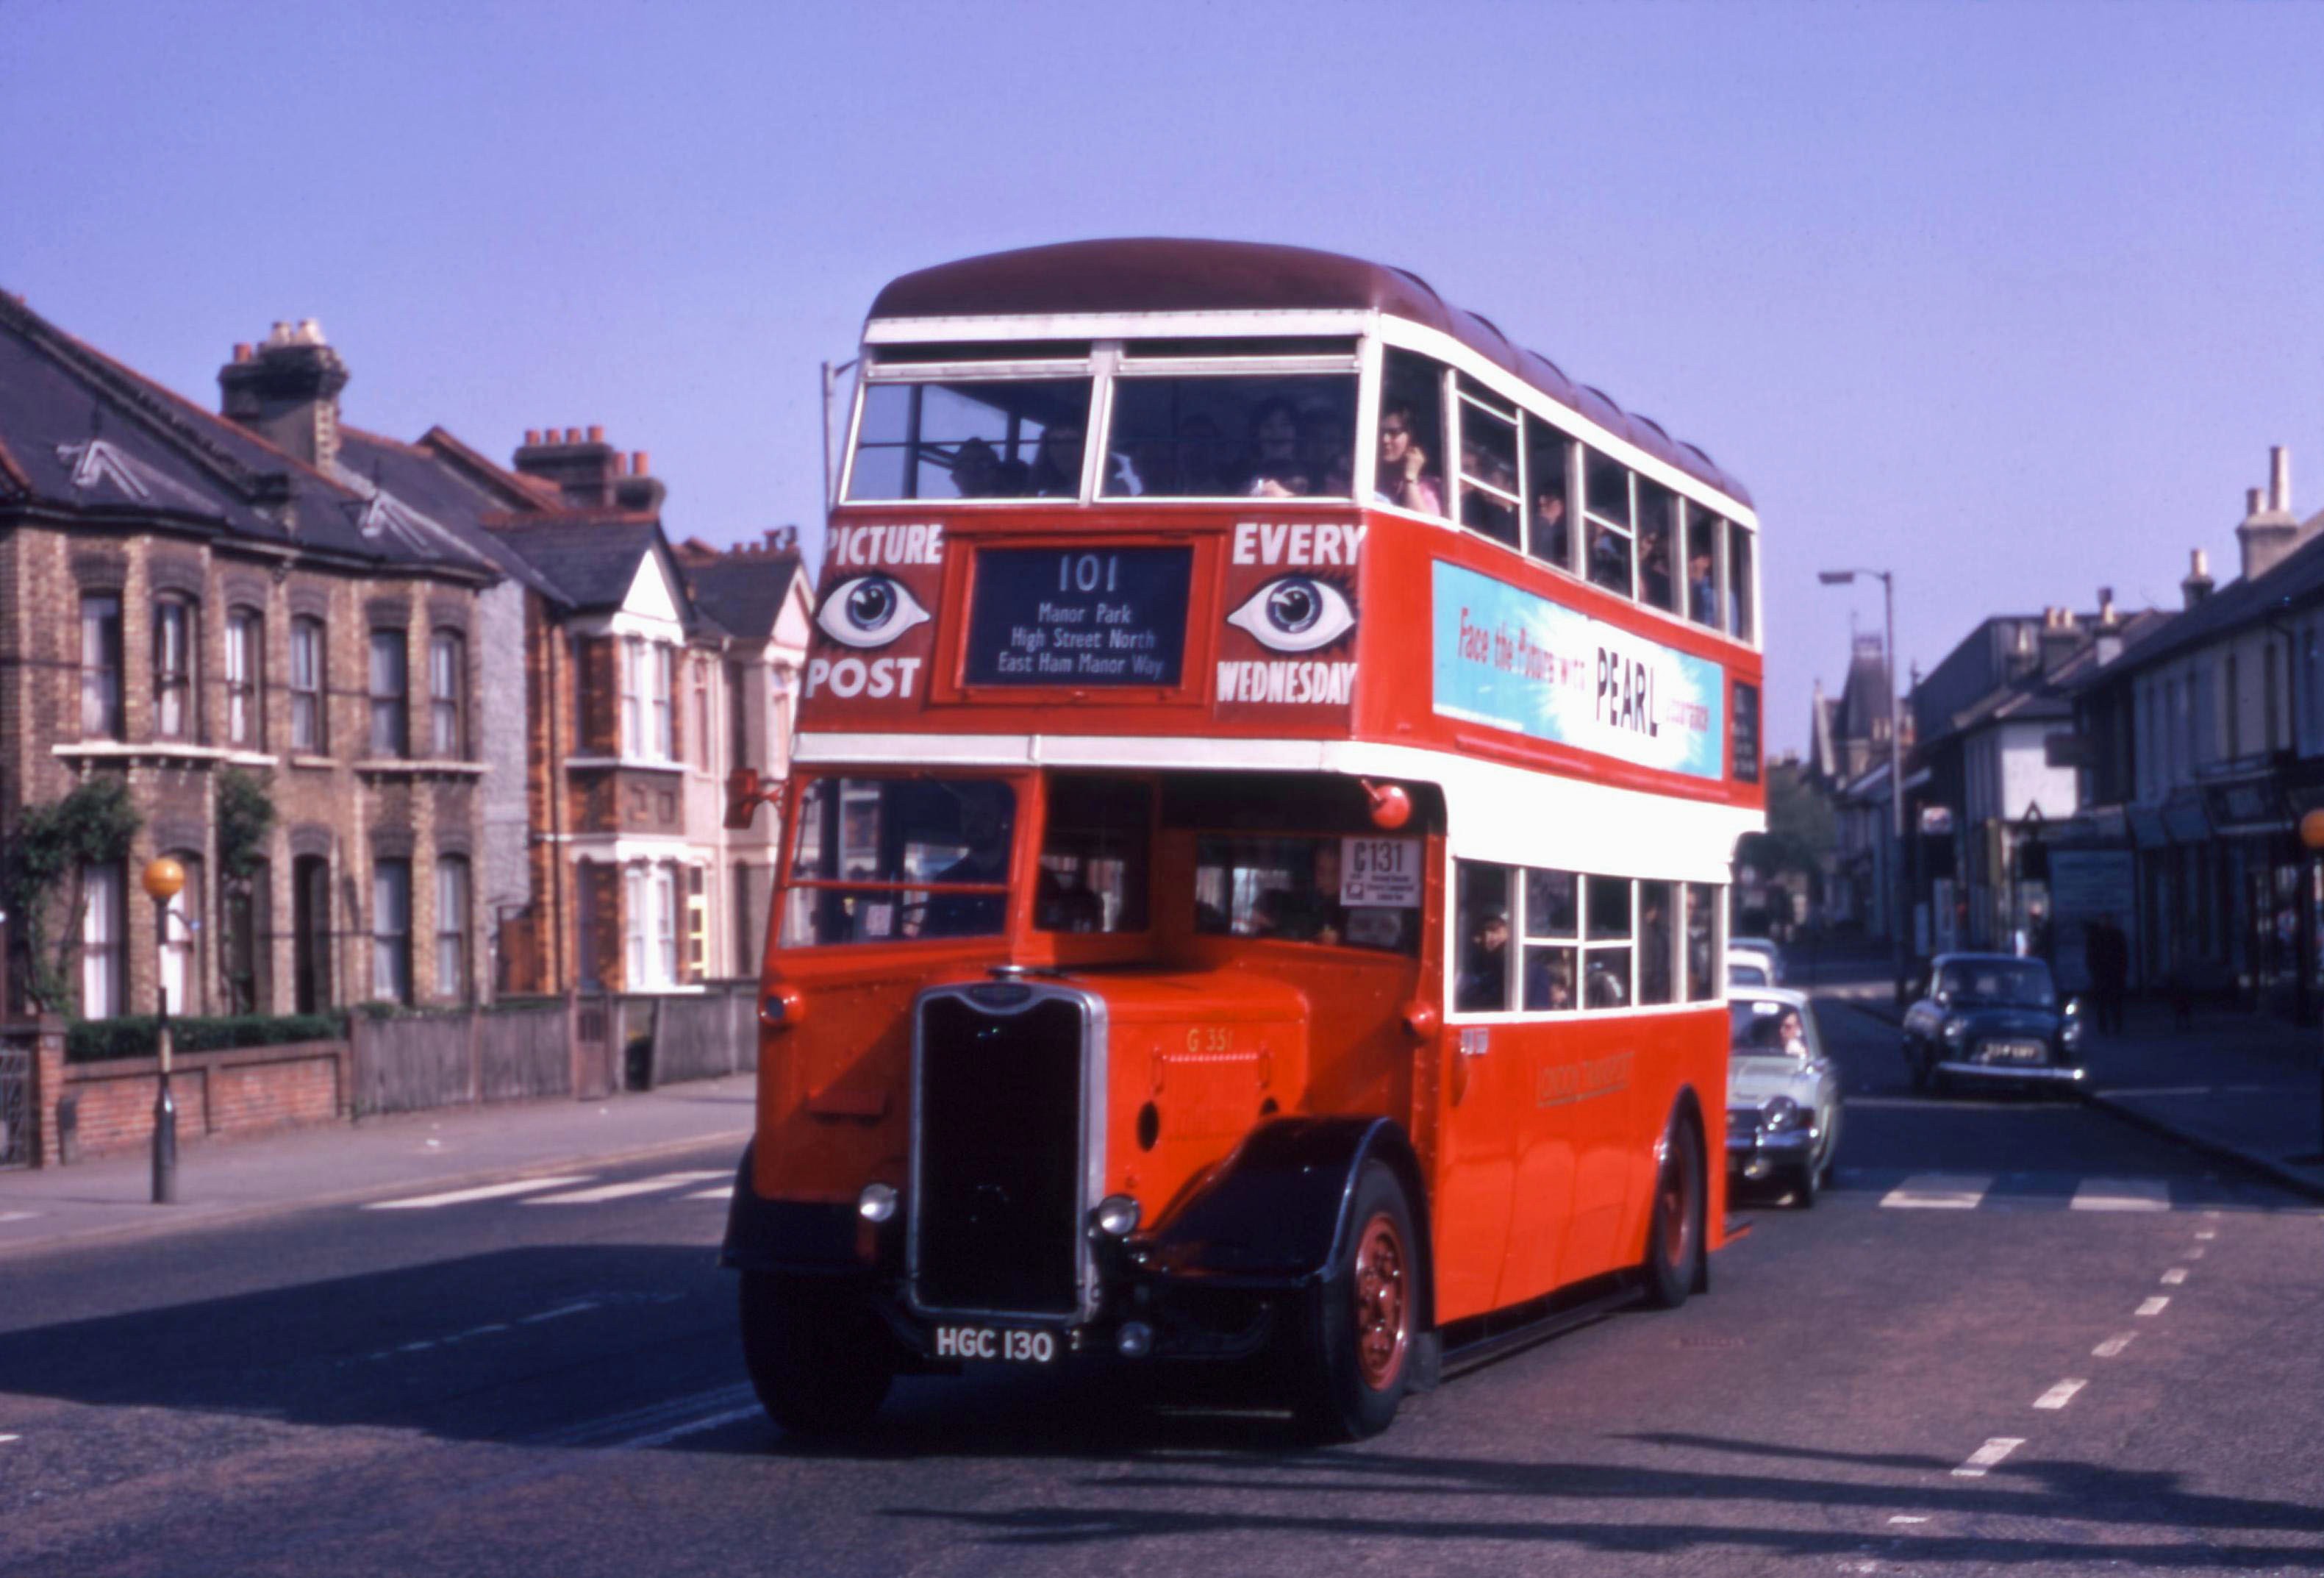 G351 on 3 May 1970 in South Croydon